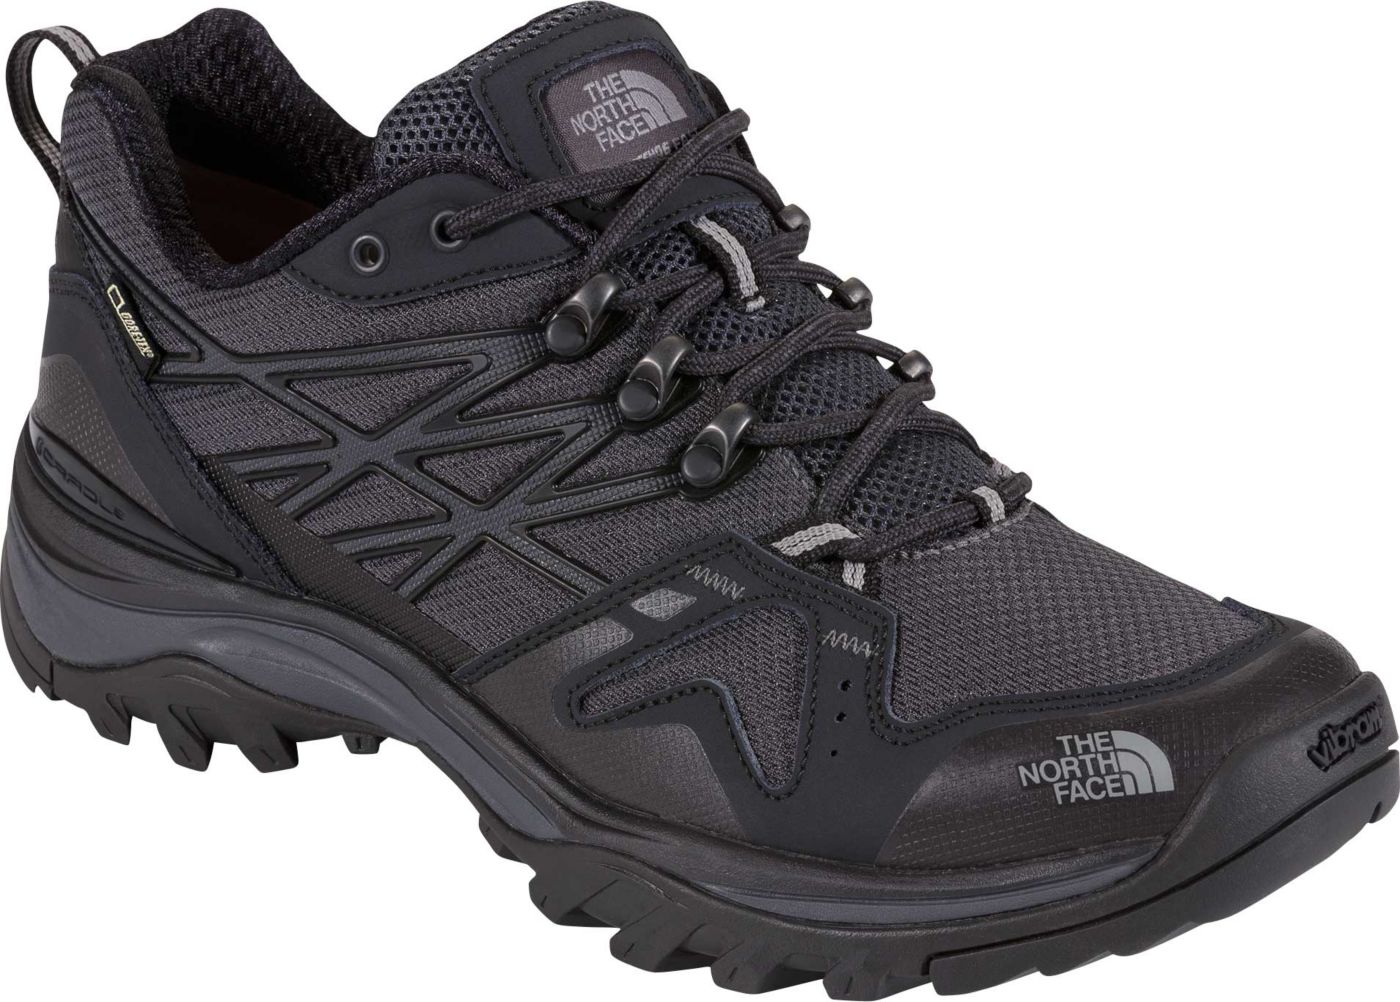 The North Face Men's Hedgehog Fastpack GORE-TEX Hiking Shoes | DICK'S ...